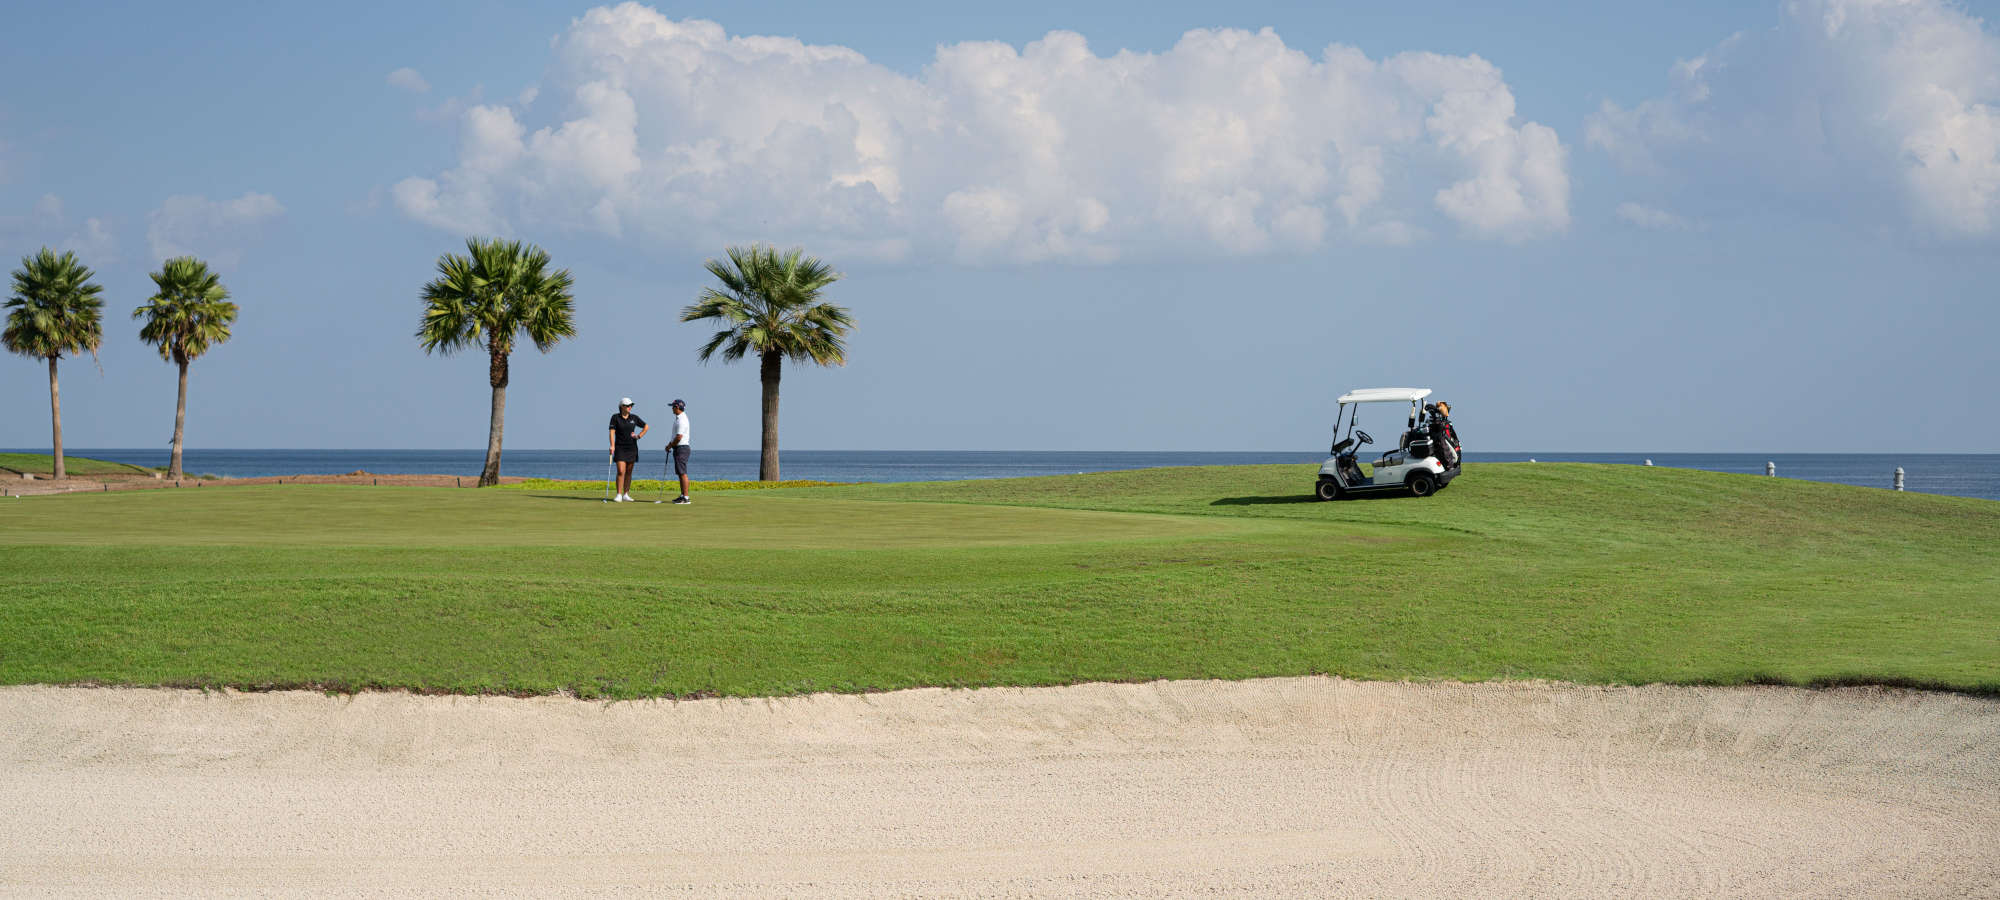 A Landscape for the Golf Course, Ocean and Sky